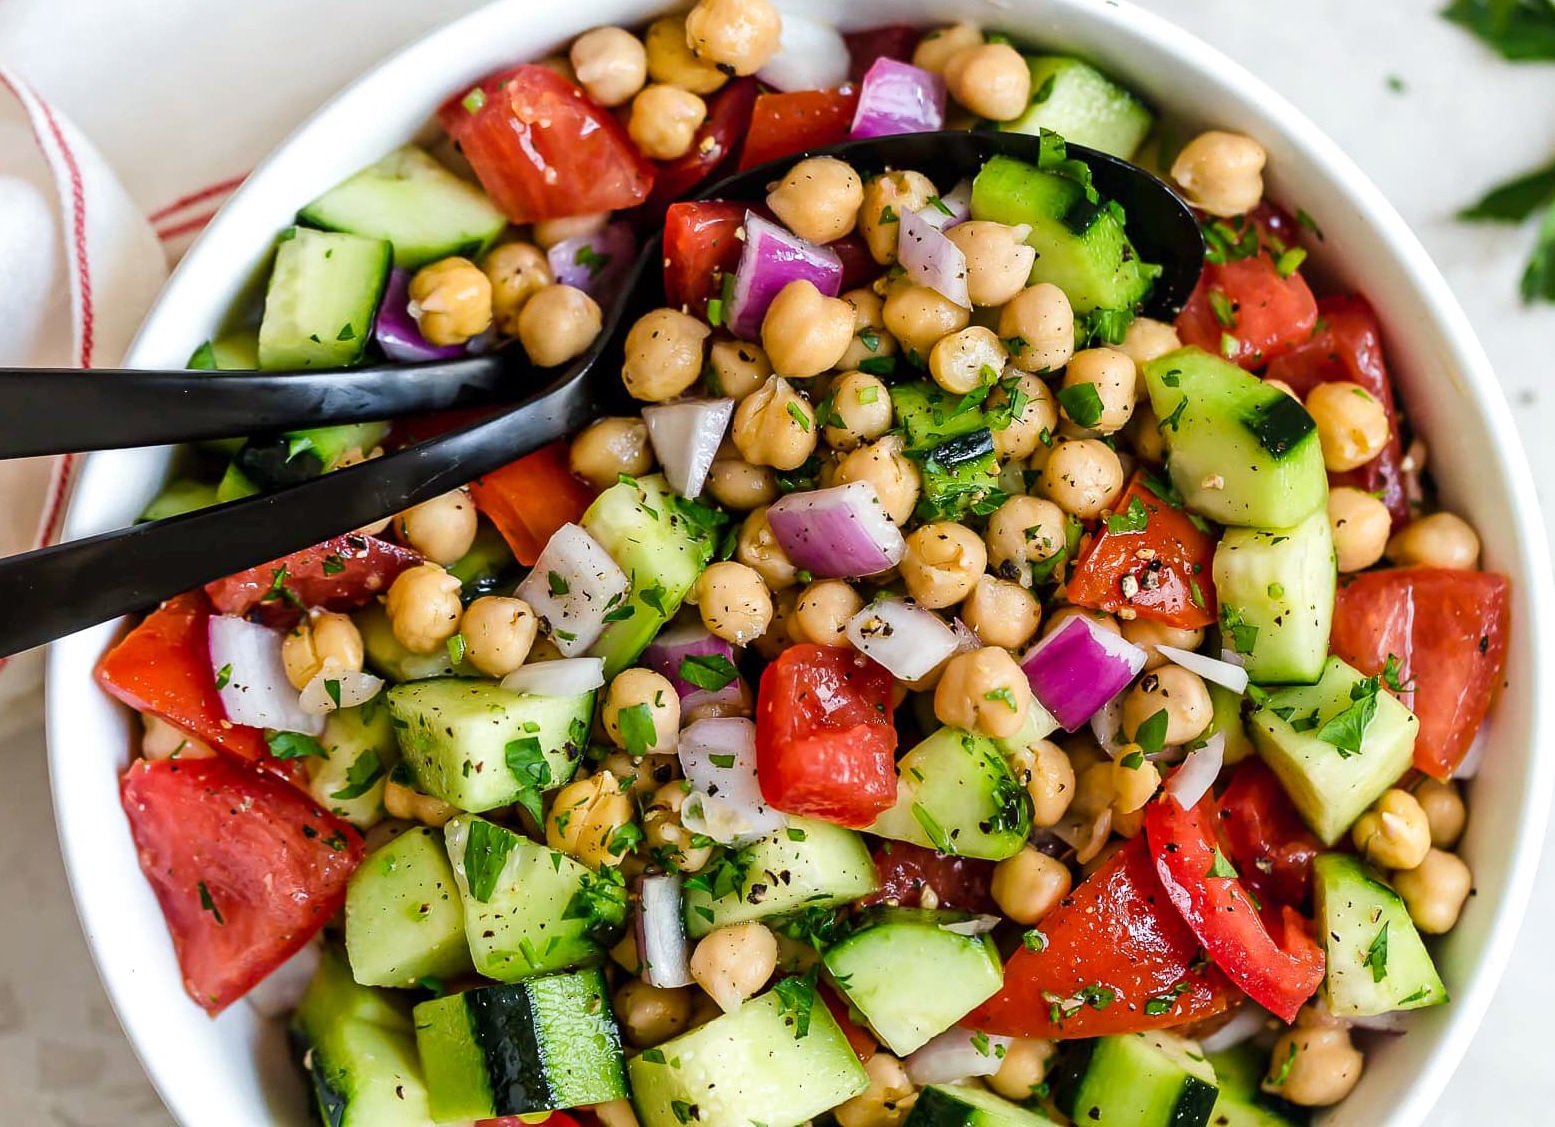 Crunchy & Nutritious: Cucumber & Chickpeas Delight! | Addis Grill